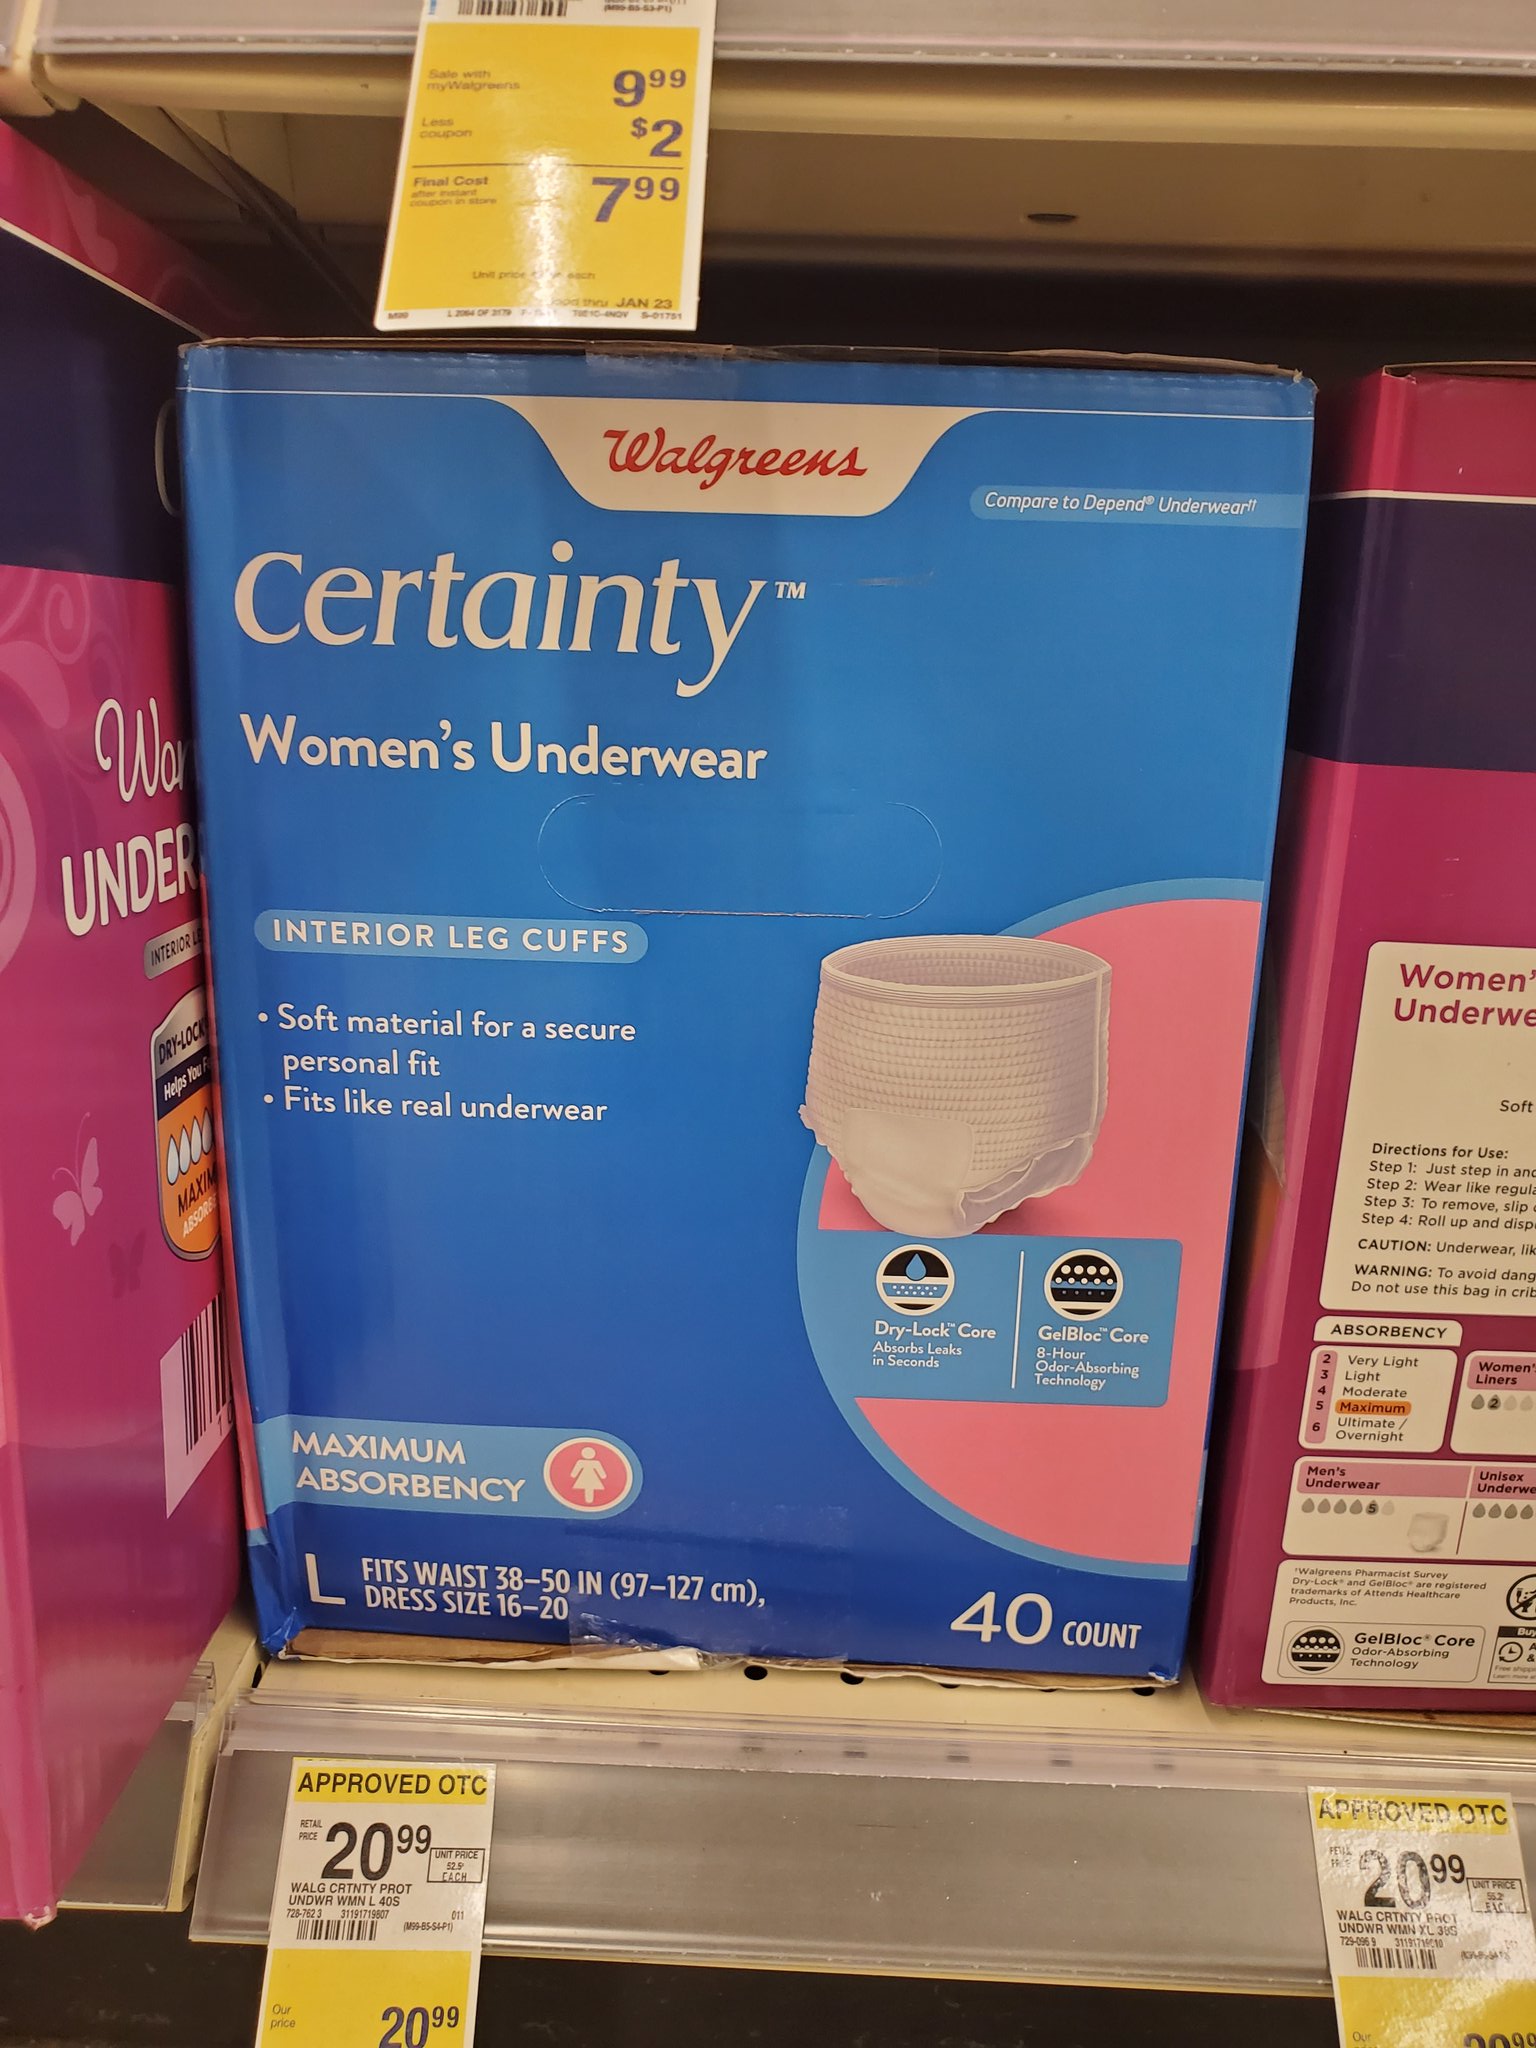 Diaper Facts on X: Certainty is the store brand adult diaper